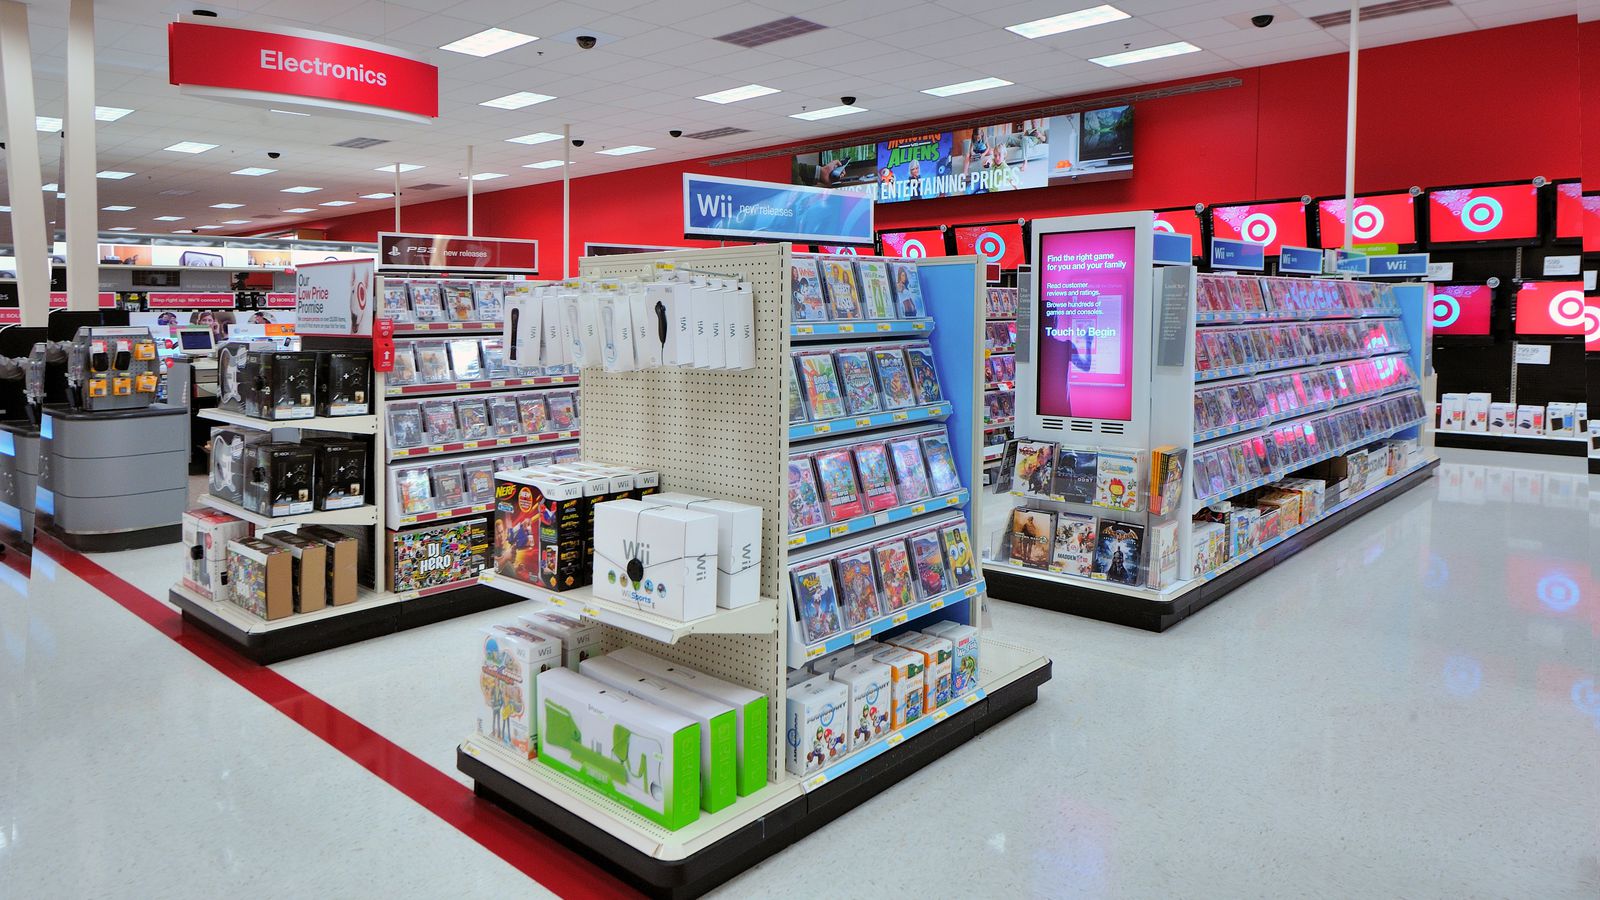 Target's Black Friday deals: $250 Wii U, $299 Xbox One and games galore